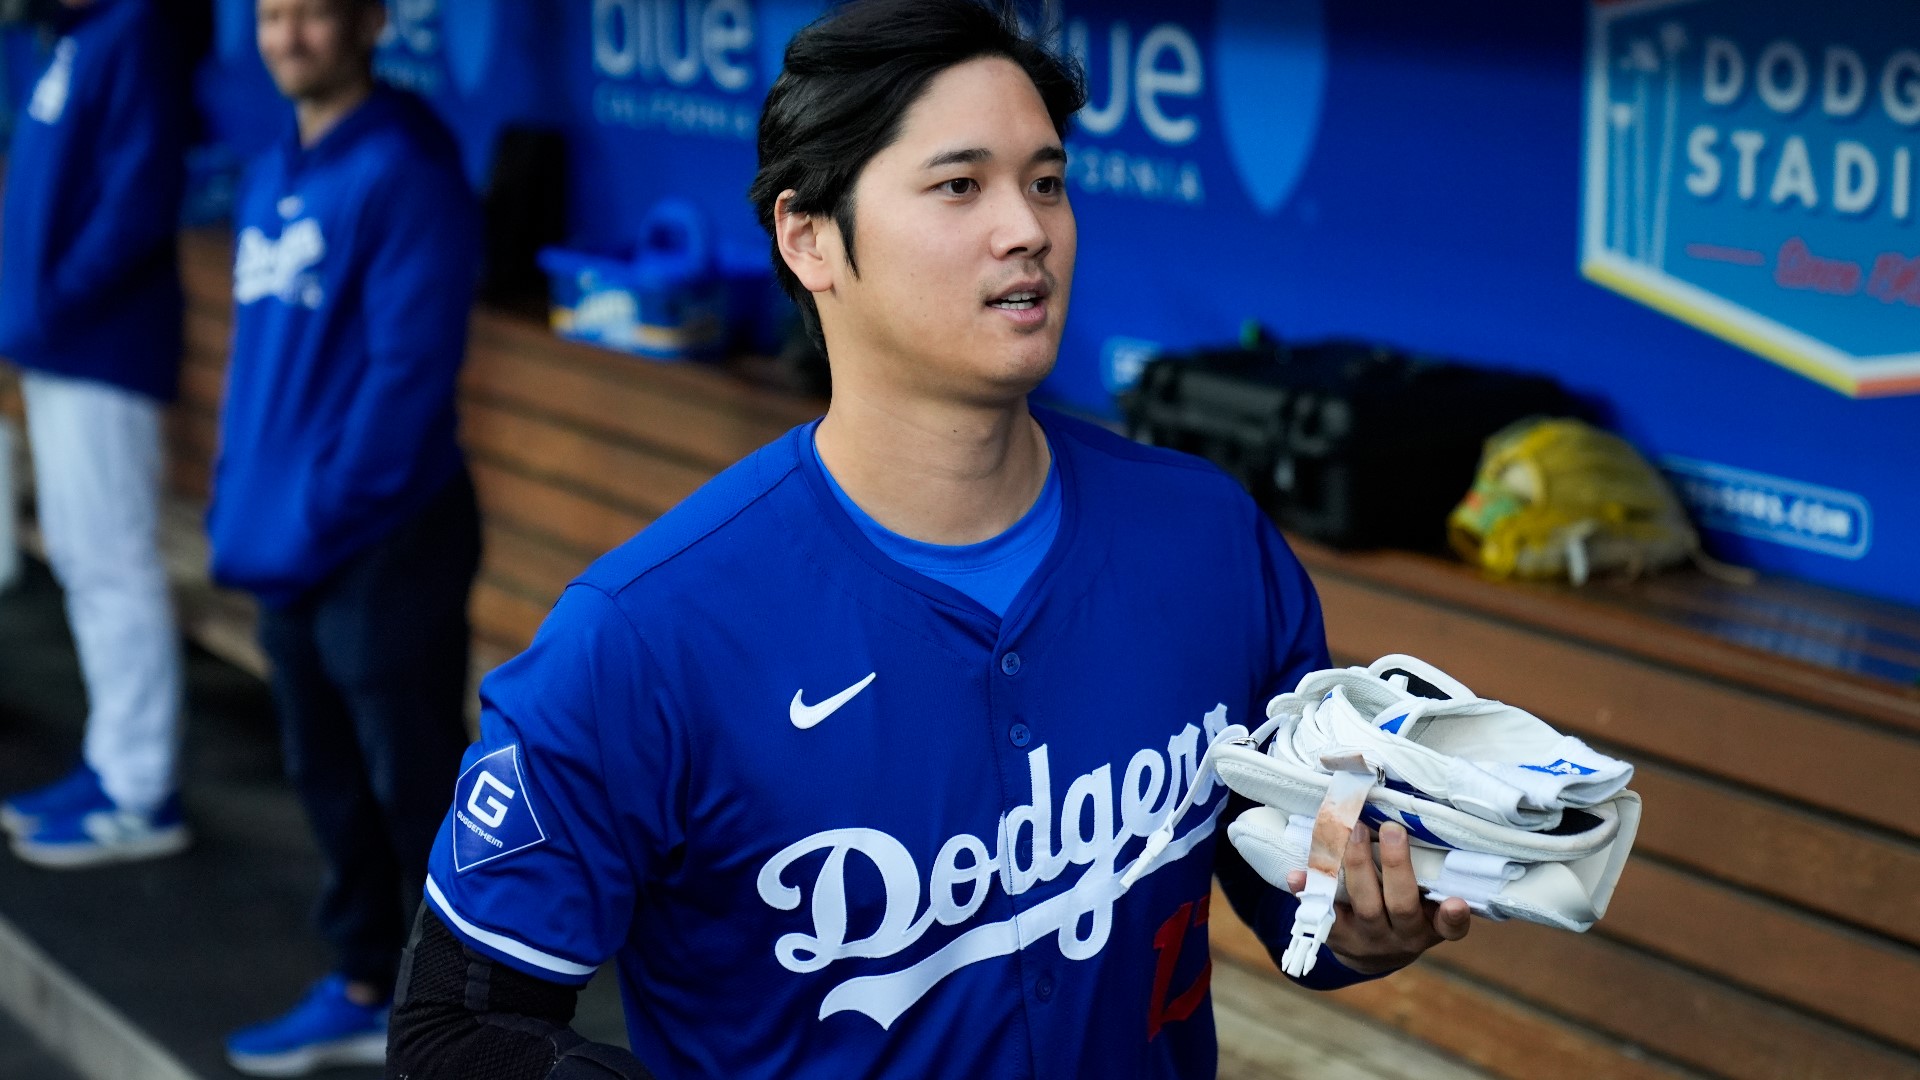 Dodgers star Shohei Ohtani said Monday he never bet on sports and interpreter Ippei Mizuhara stole money from him and told lies.